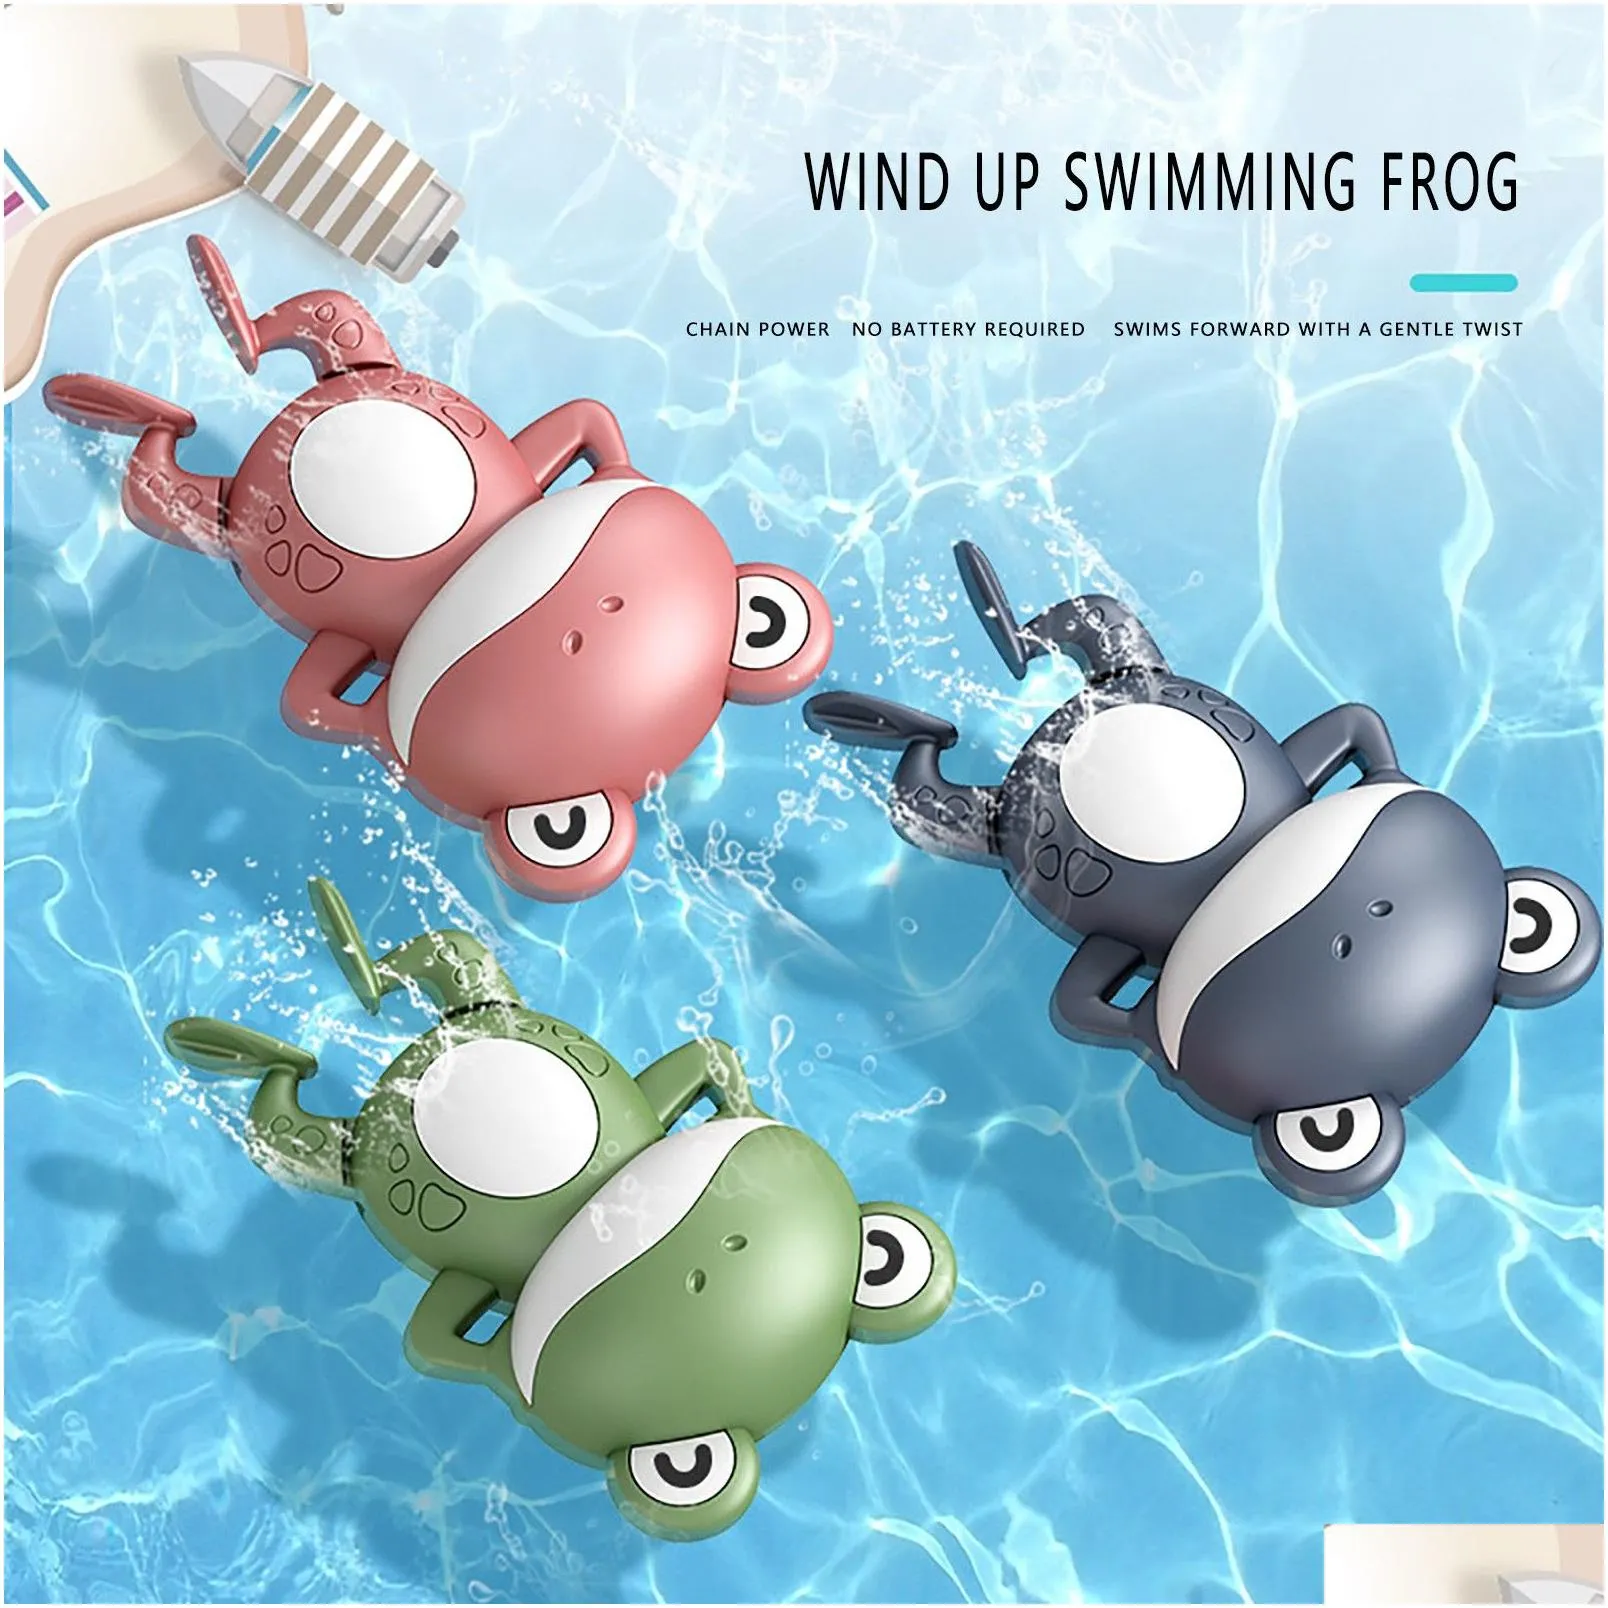 Baby Bath Toys For Children New Swimming Bathing Toy Cartoon Animal Bathroom Classic Cute Frogs Clockwork 0 12 Months 1111